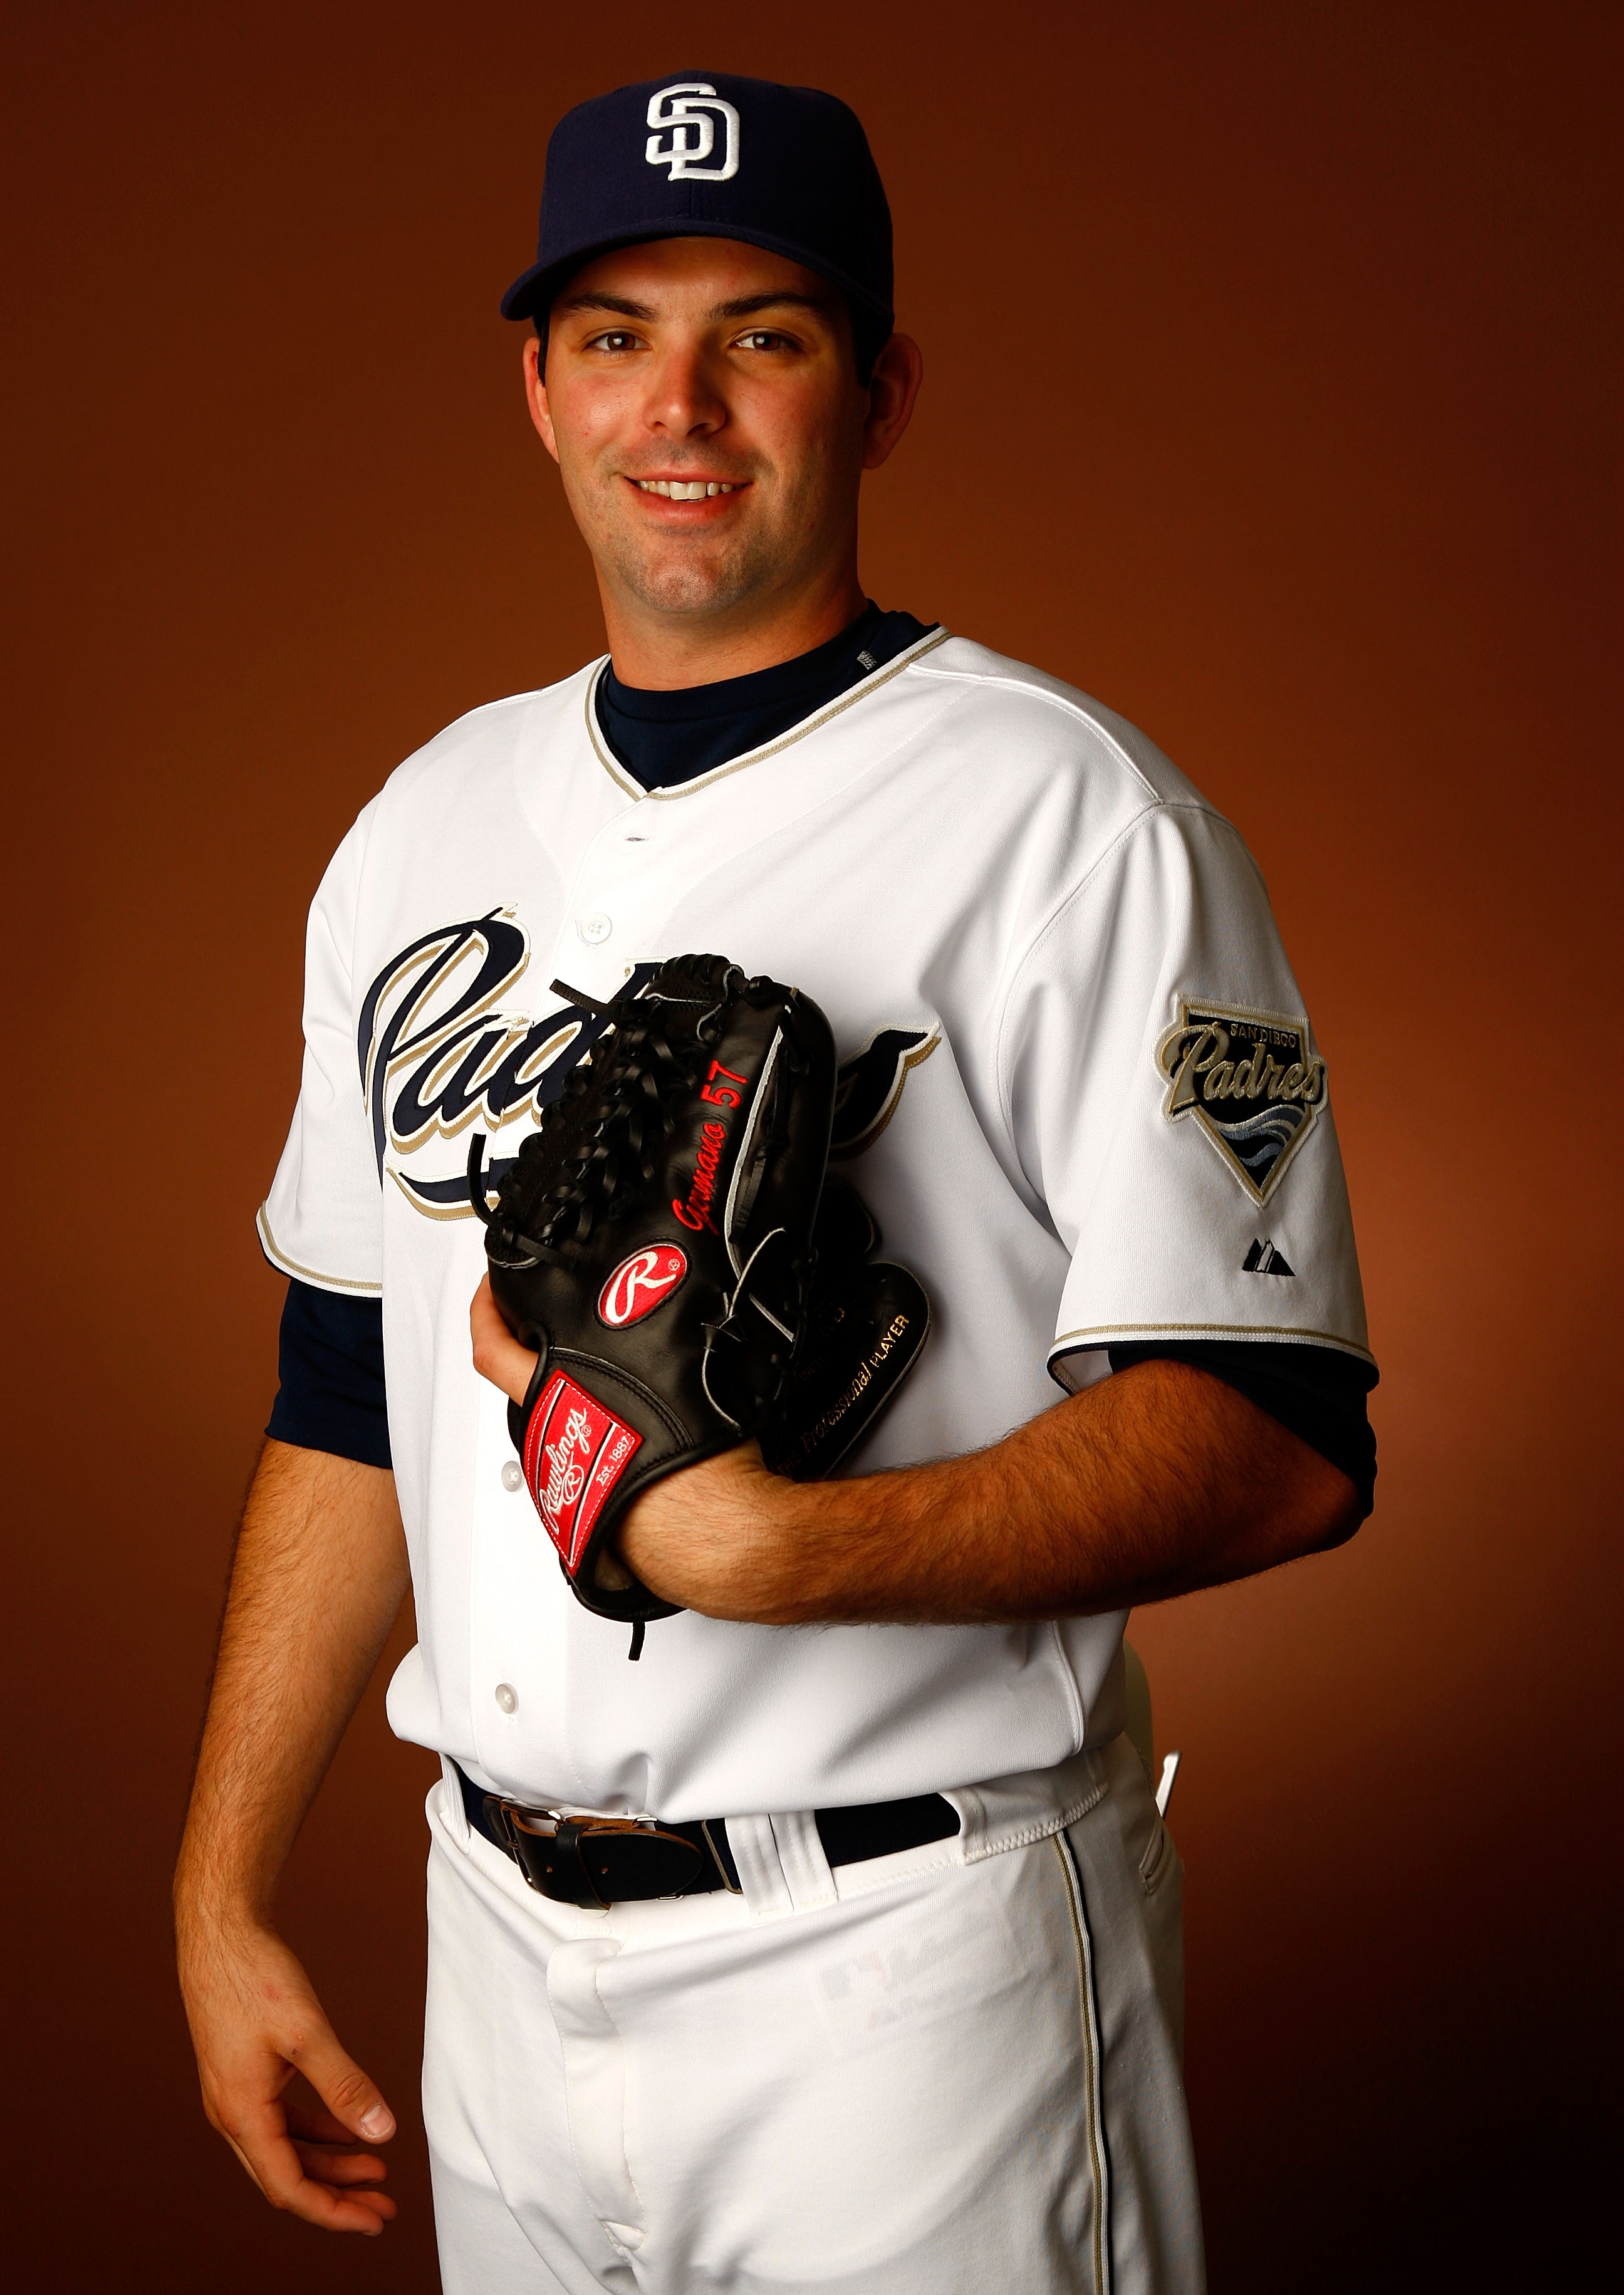 PEORIA, AZ - FEBRUARY 22:  Pitcher Justin Germano #57 of the San Diego Padres poses for a portrait during spring training on February 22, 2008 at the Peoria Sports Complex in Peoria, Arizona.  (Photo by Jamie Squire/Getty Images)